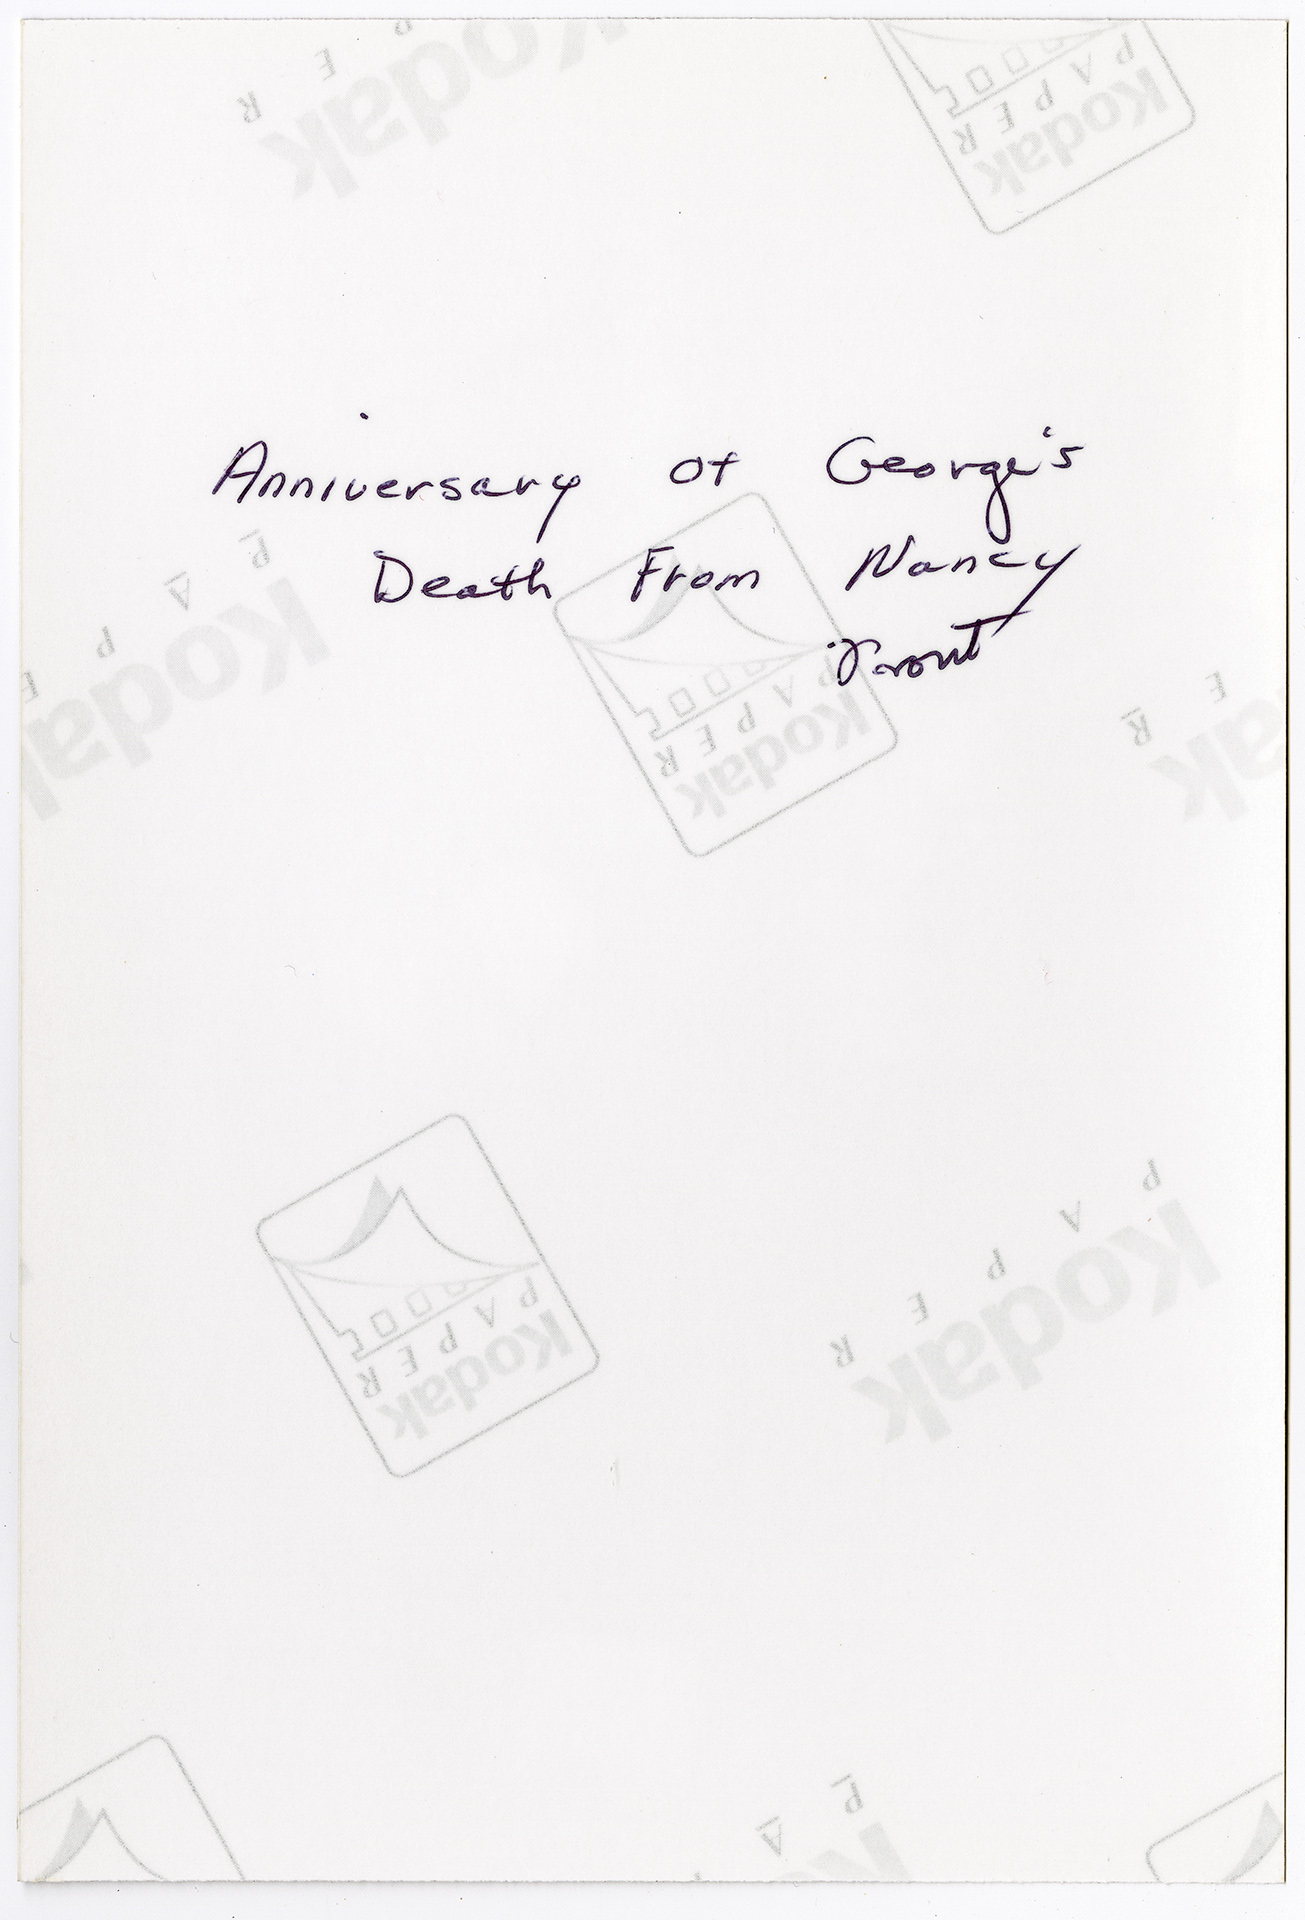 Anniversary of George's Death